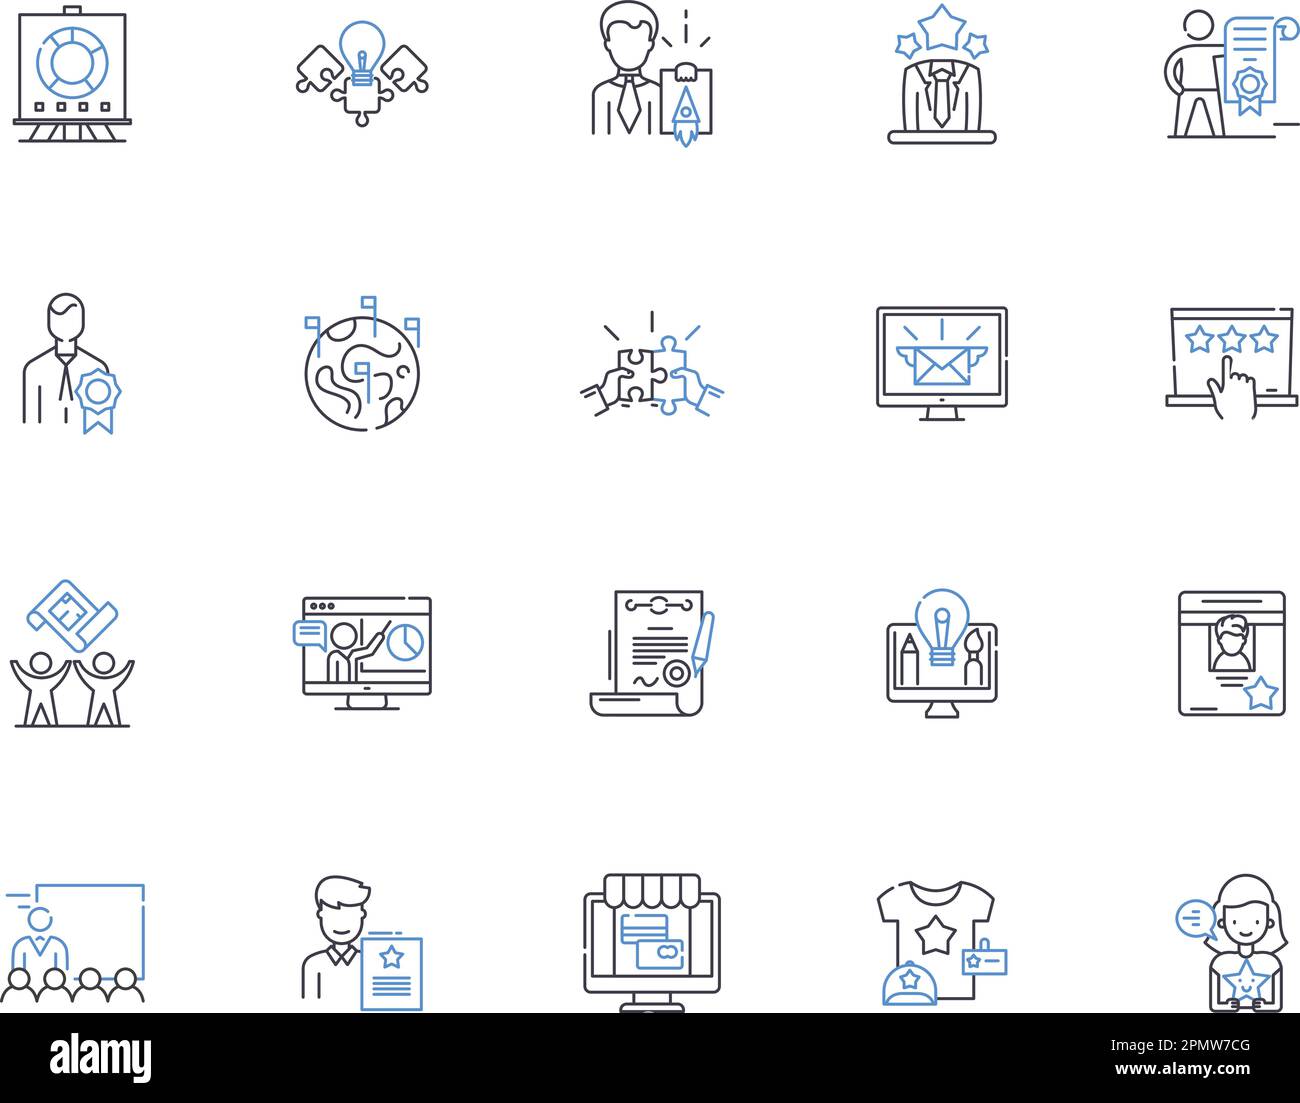 Marketing concept outline icons collection. Strategy, Promotion, Customers, Segmentation, Brand, Research, Targeting vector and illustration concept Stock Vector